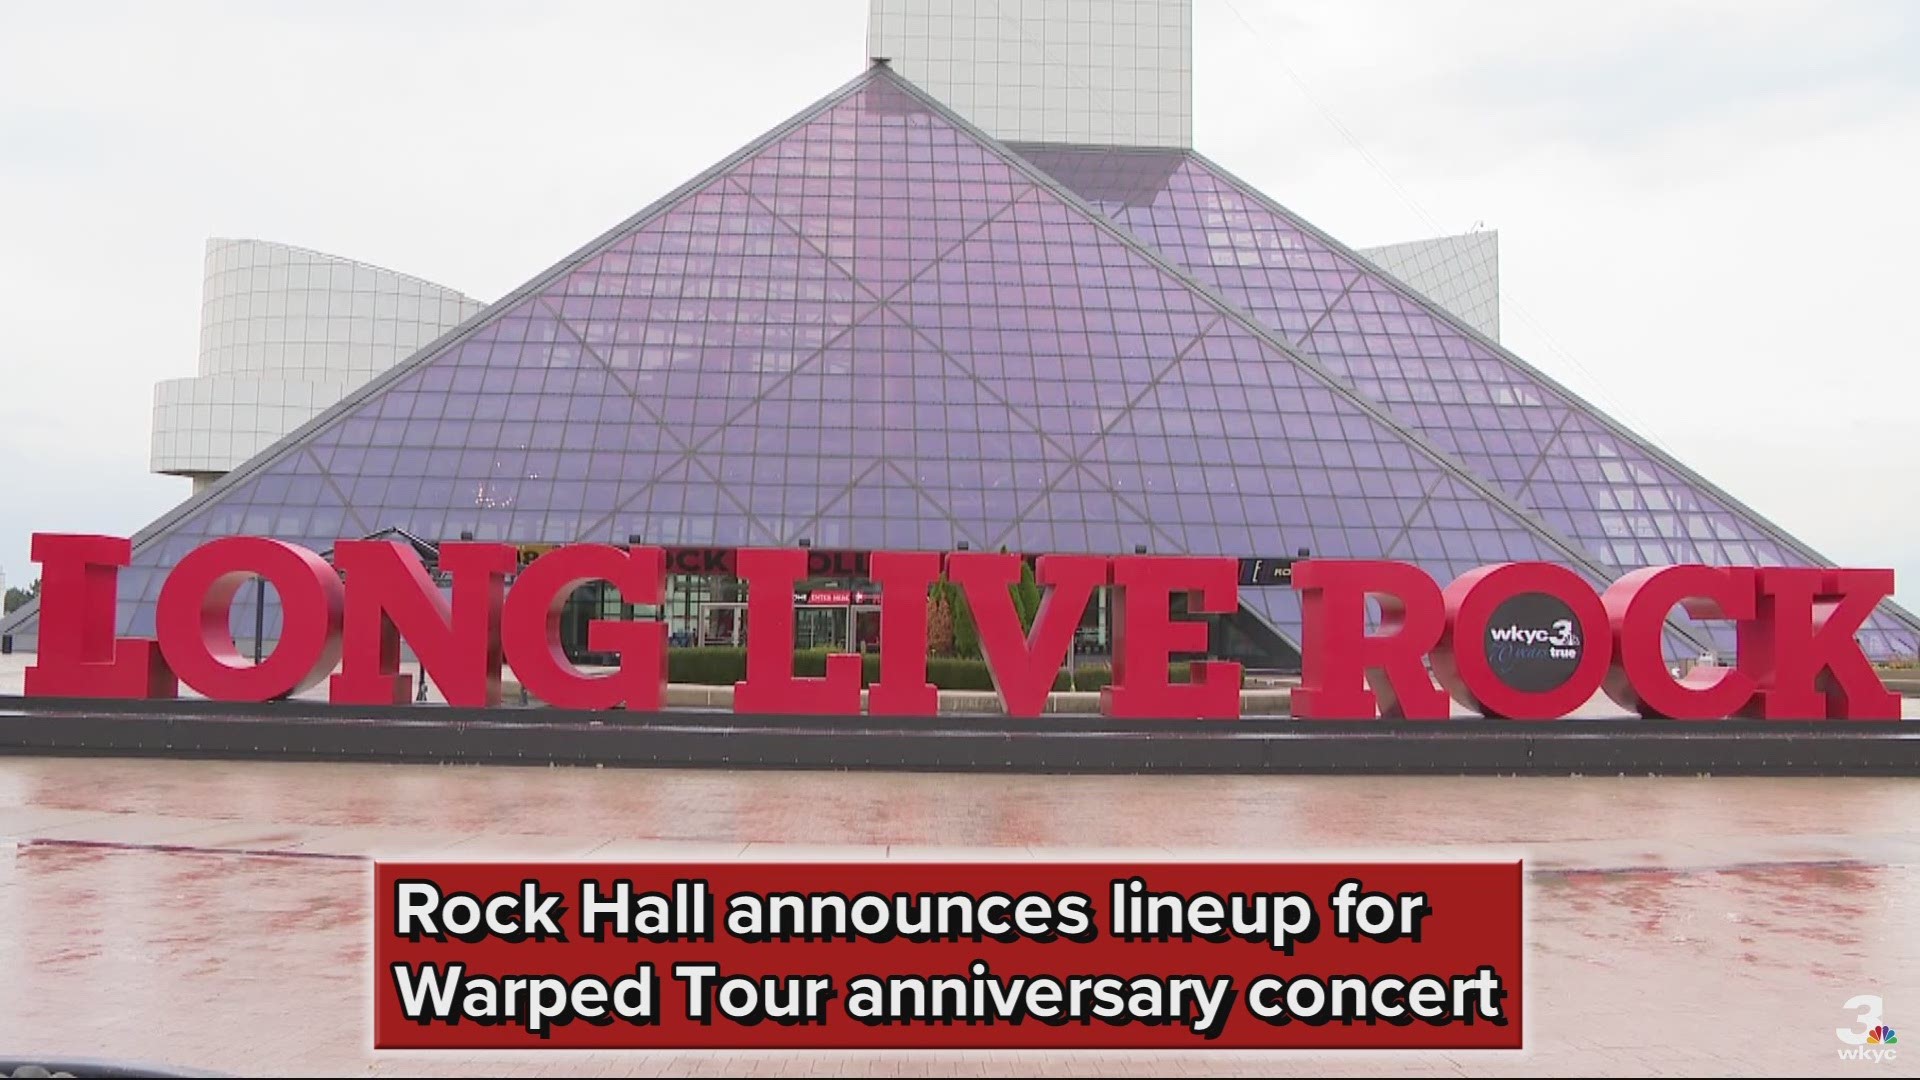 The concert will kick off the opening of the new Warped Tour exhibit.